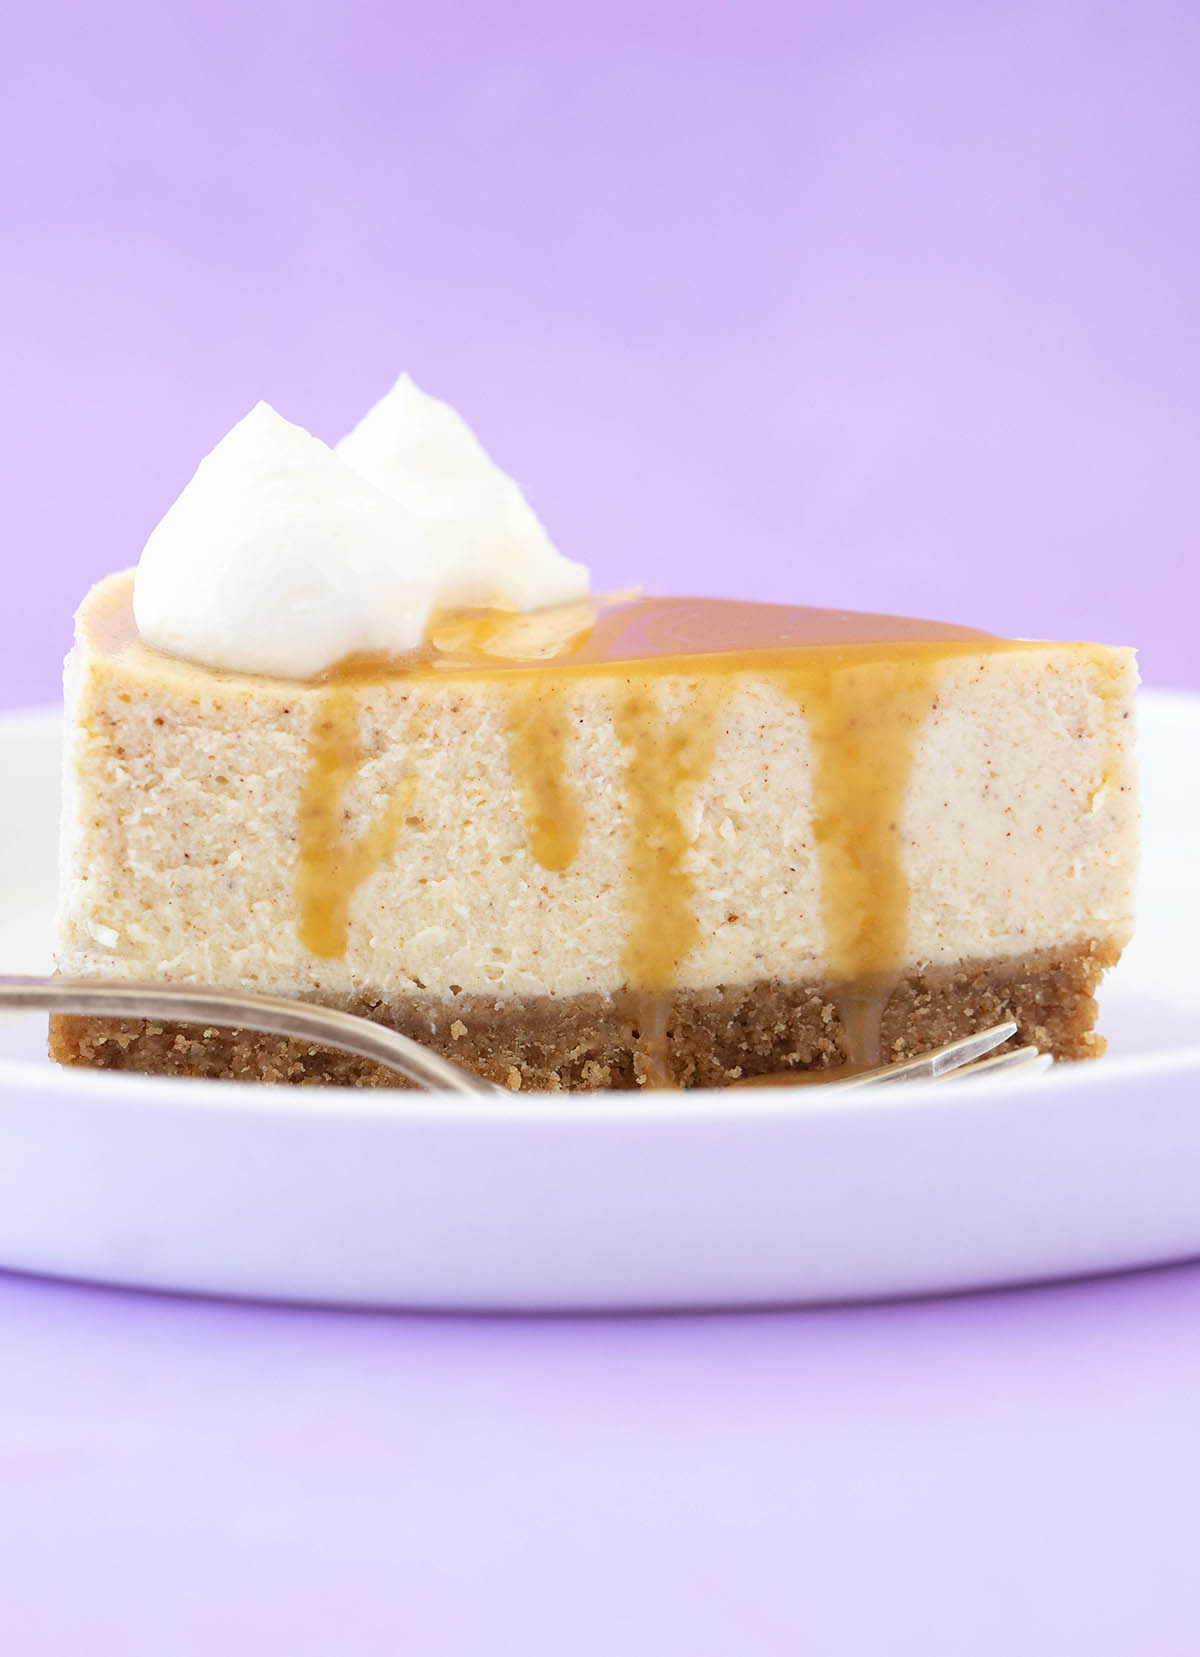 Side shot of a slice of cheesecake covered in caramel on a white plate